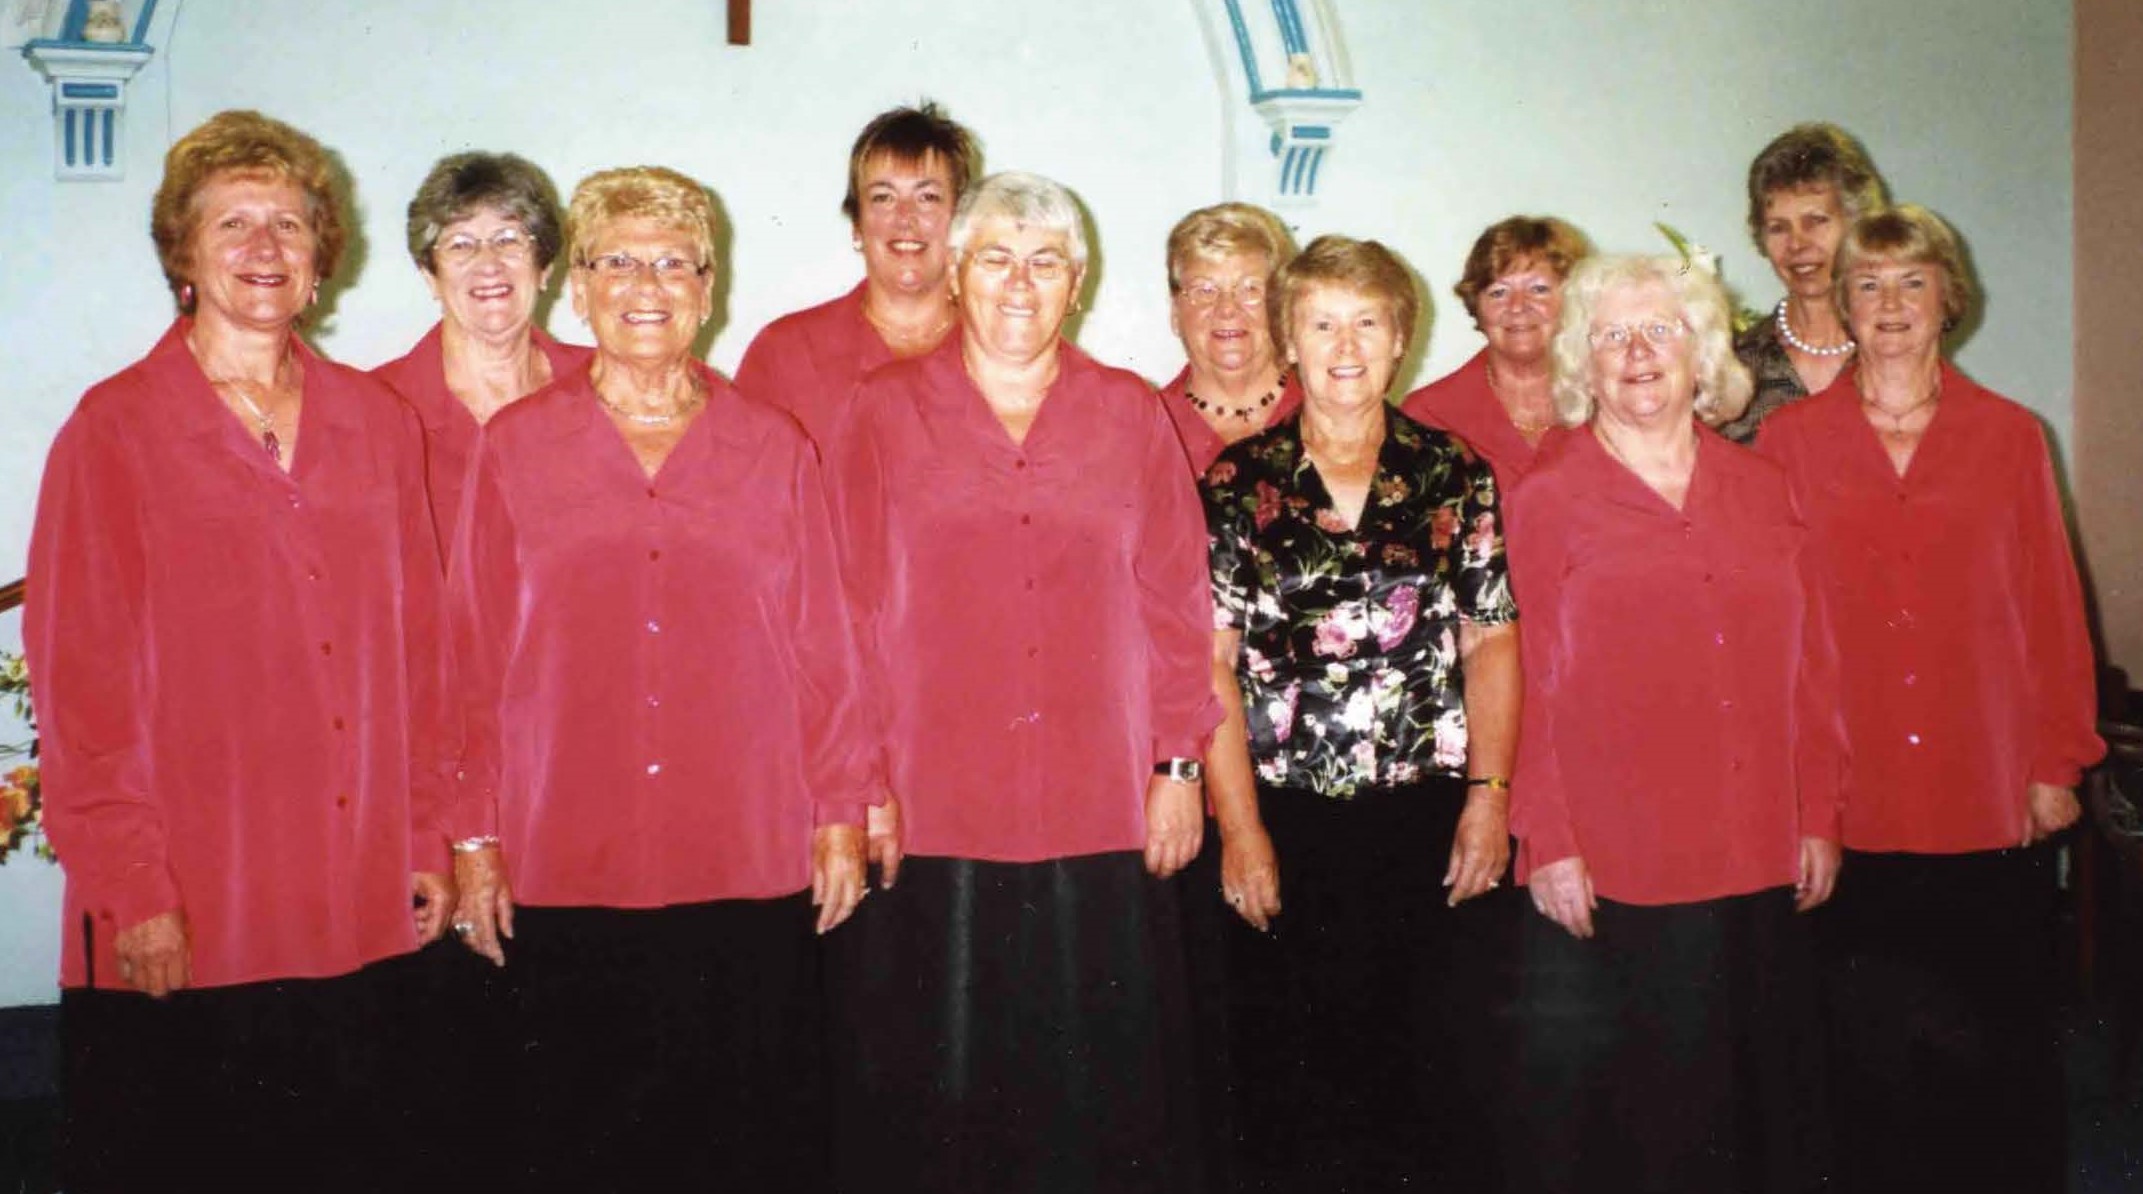 The Carn Awn Singers, 2006